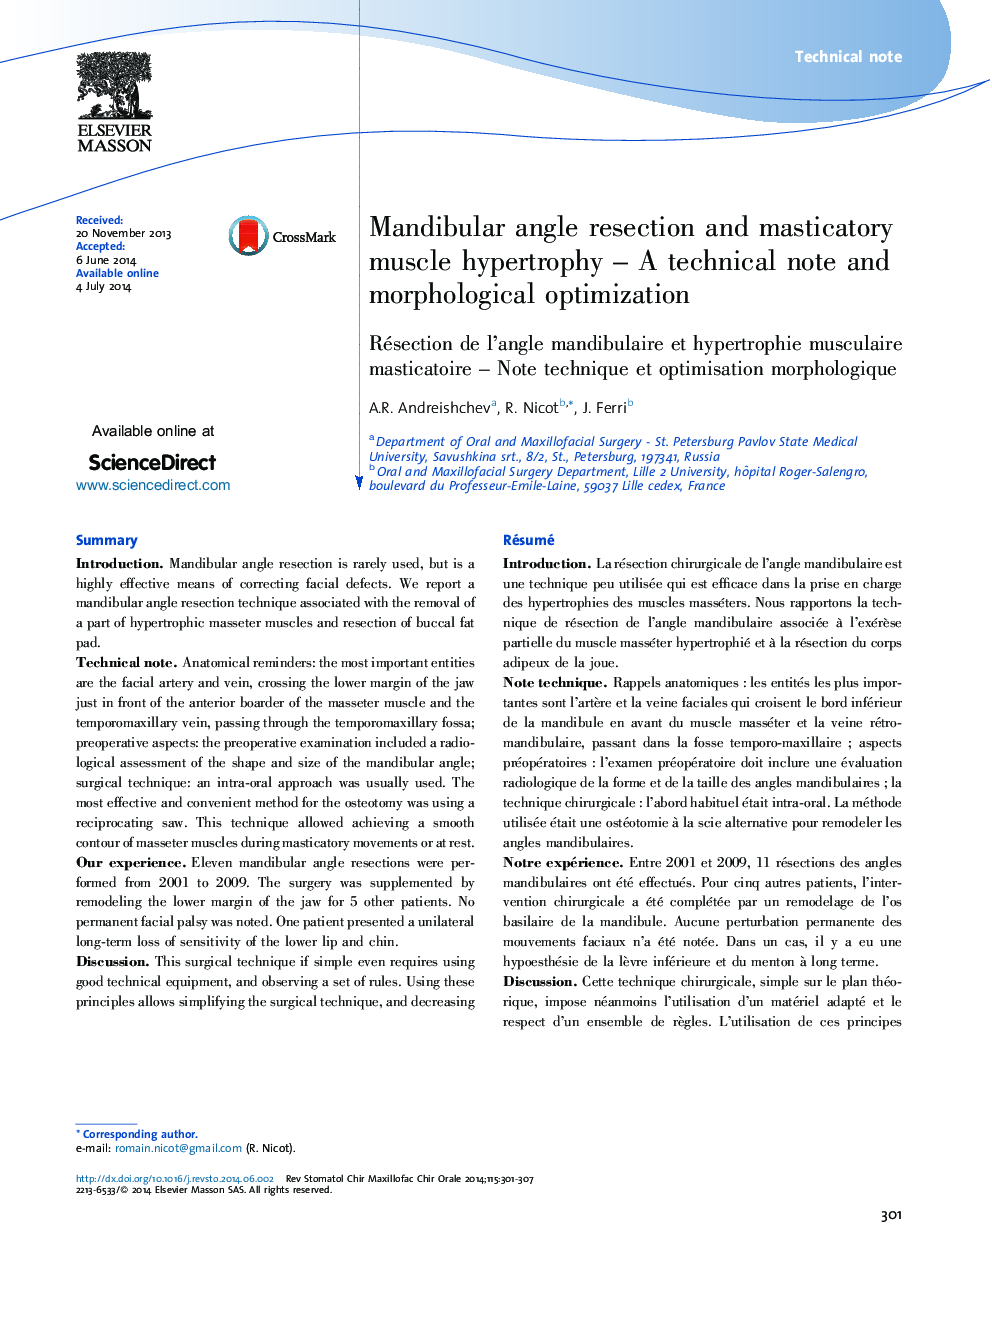 Mandibular angle resection and masticatory muscle hypertrophy - A technical note and morphological optimization